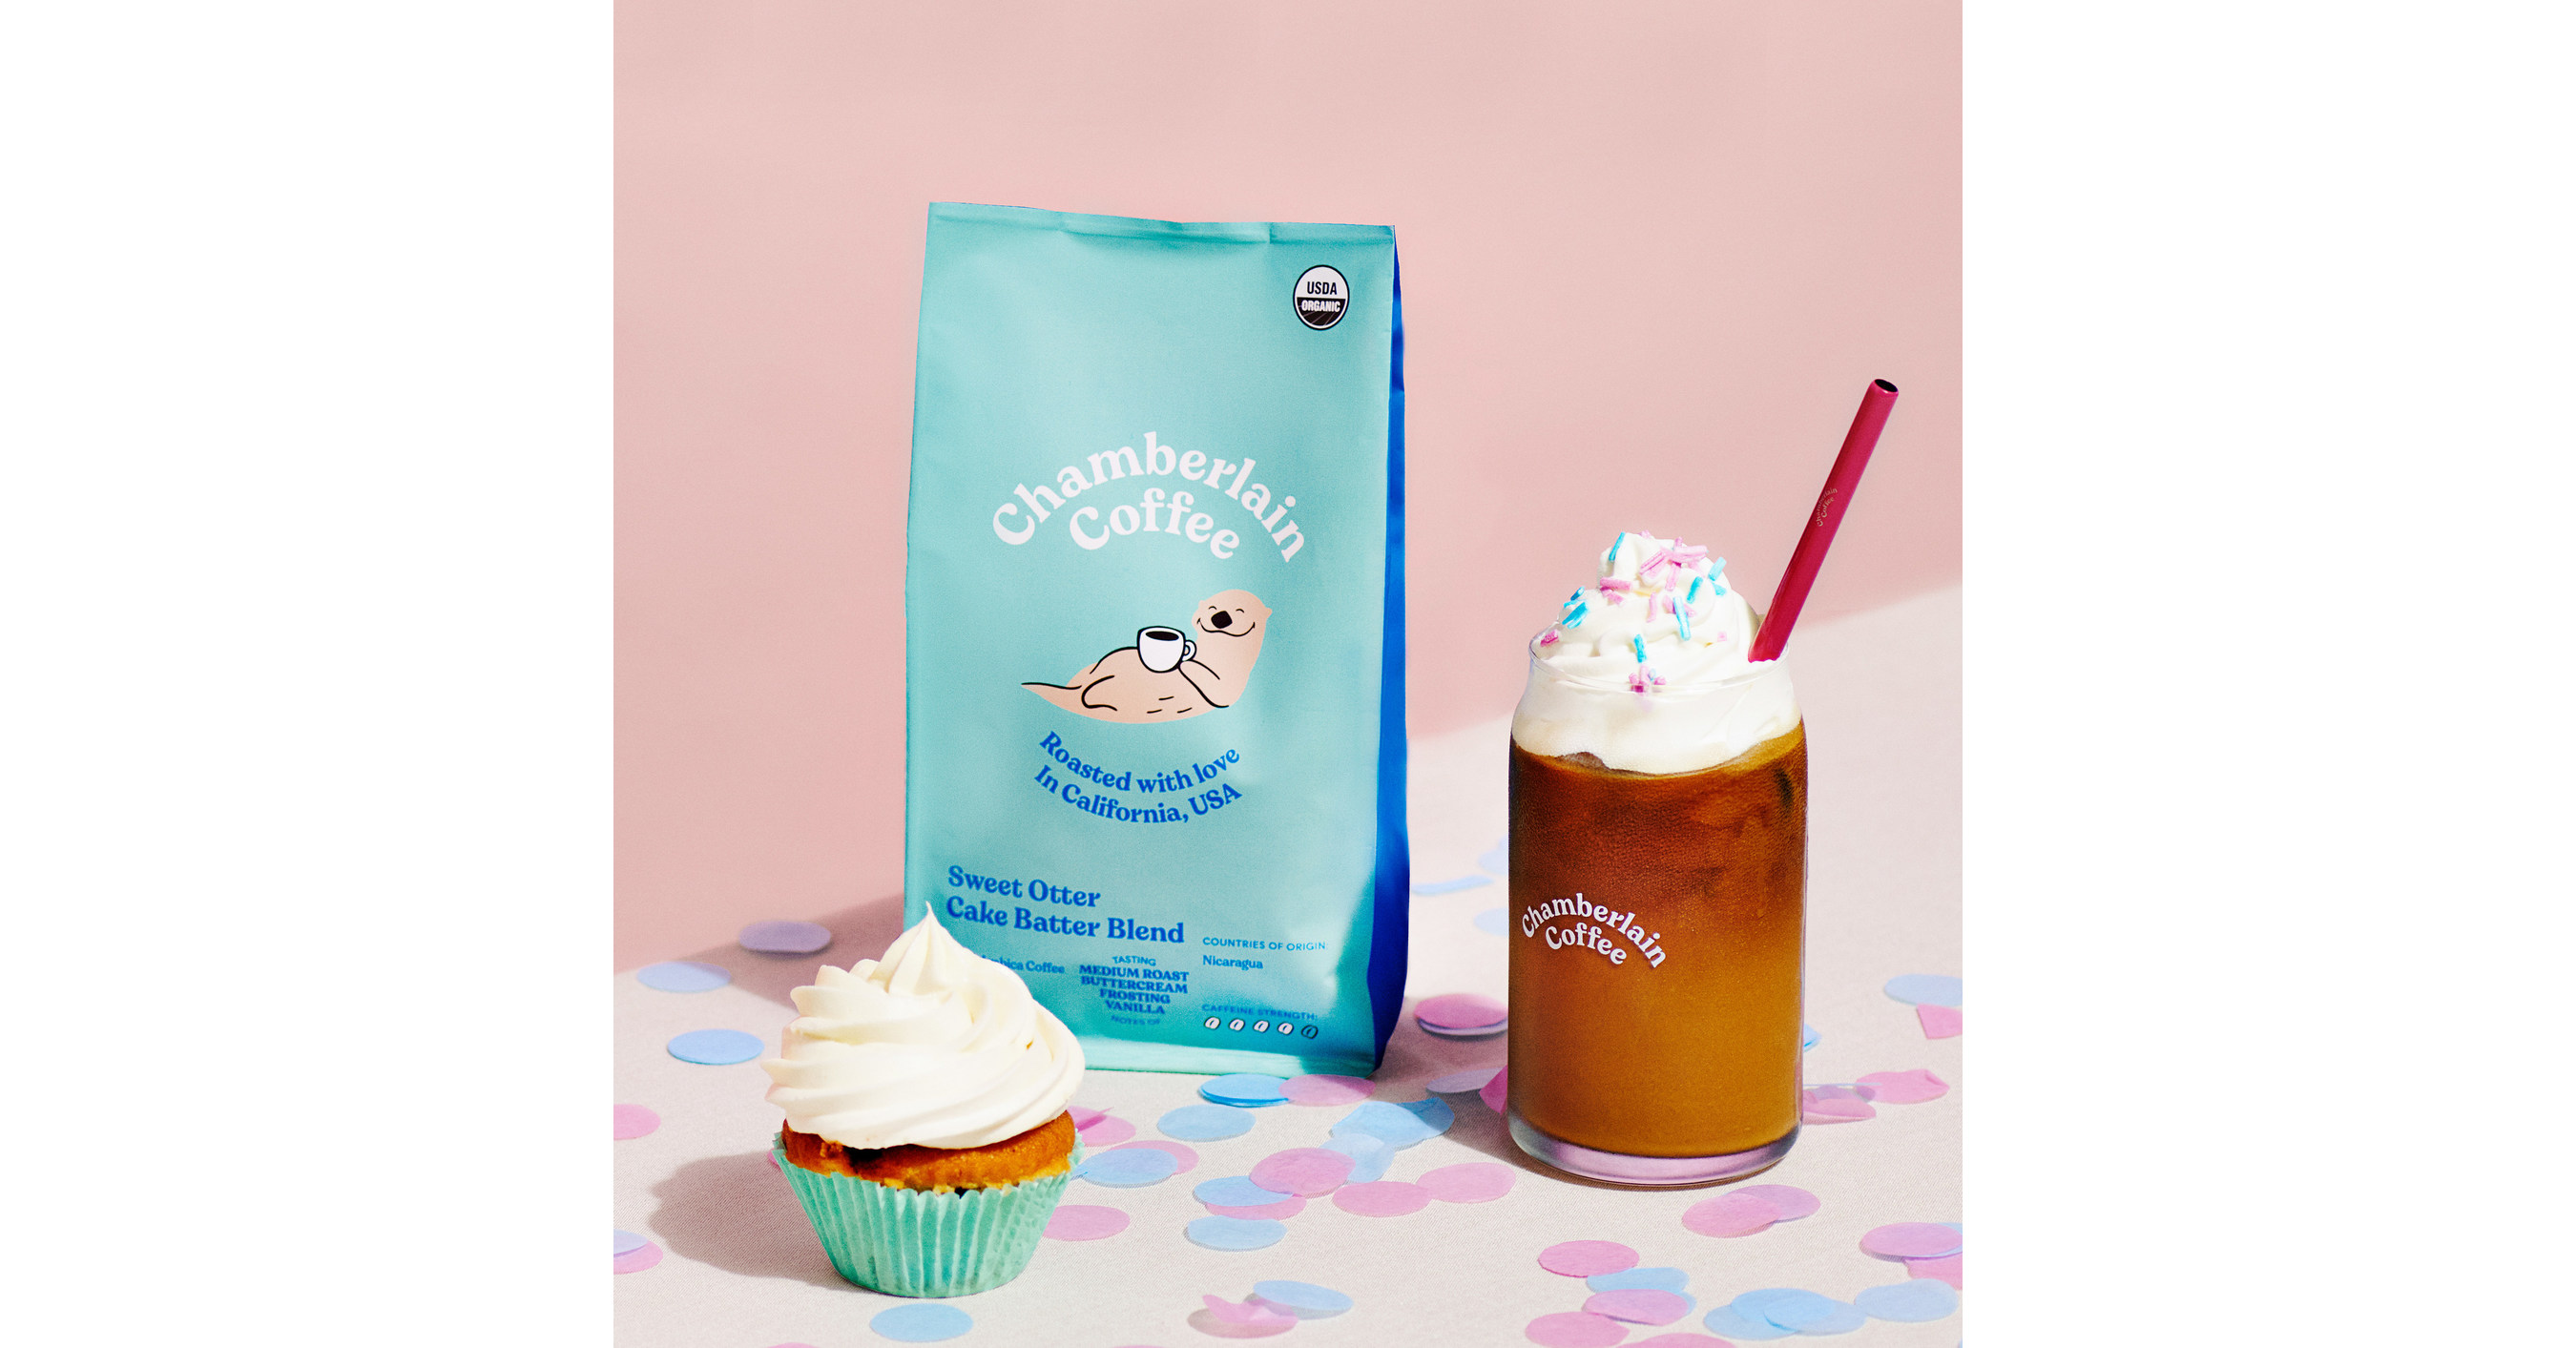 Chamberlain Coffee Launches Limited-Edition, Sweet Otter Cake Batter Blend